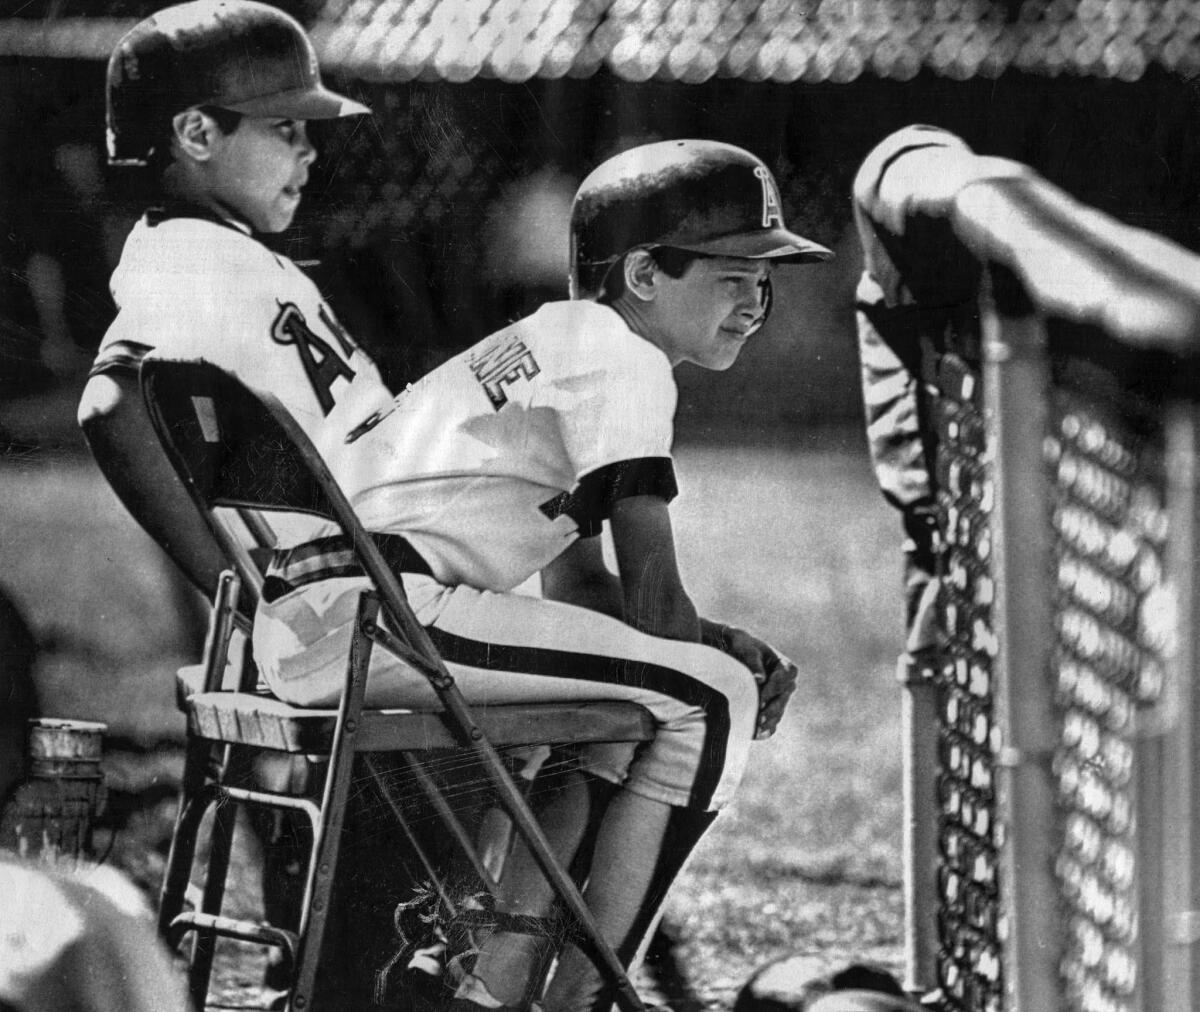 March 22, 1984: Bat boys for the Angels' game against the Oakland Athletics were Dominquez Jackson Jr., brother of Reggie Jackson, and Aaron Boone, son of catcher Bob Boone.